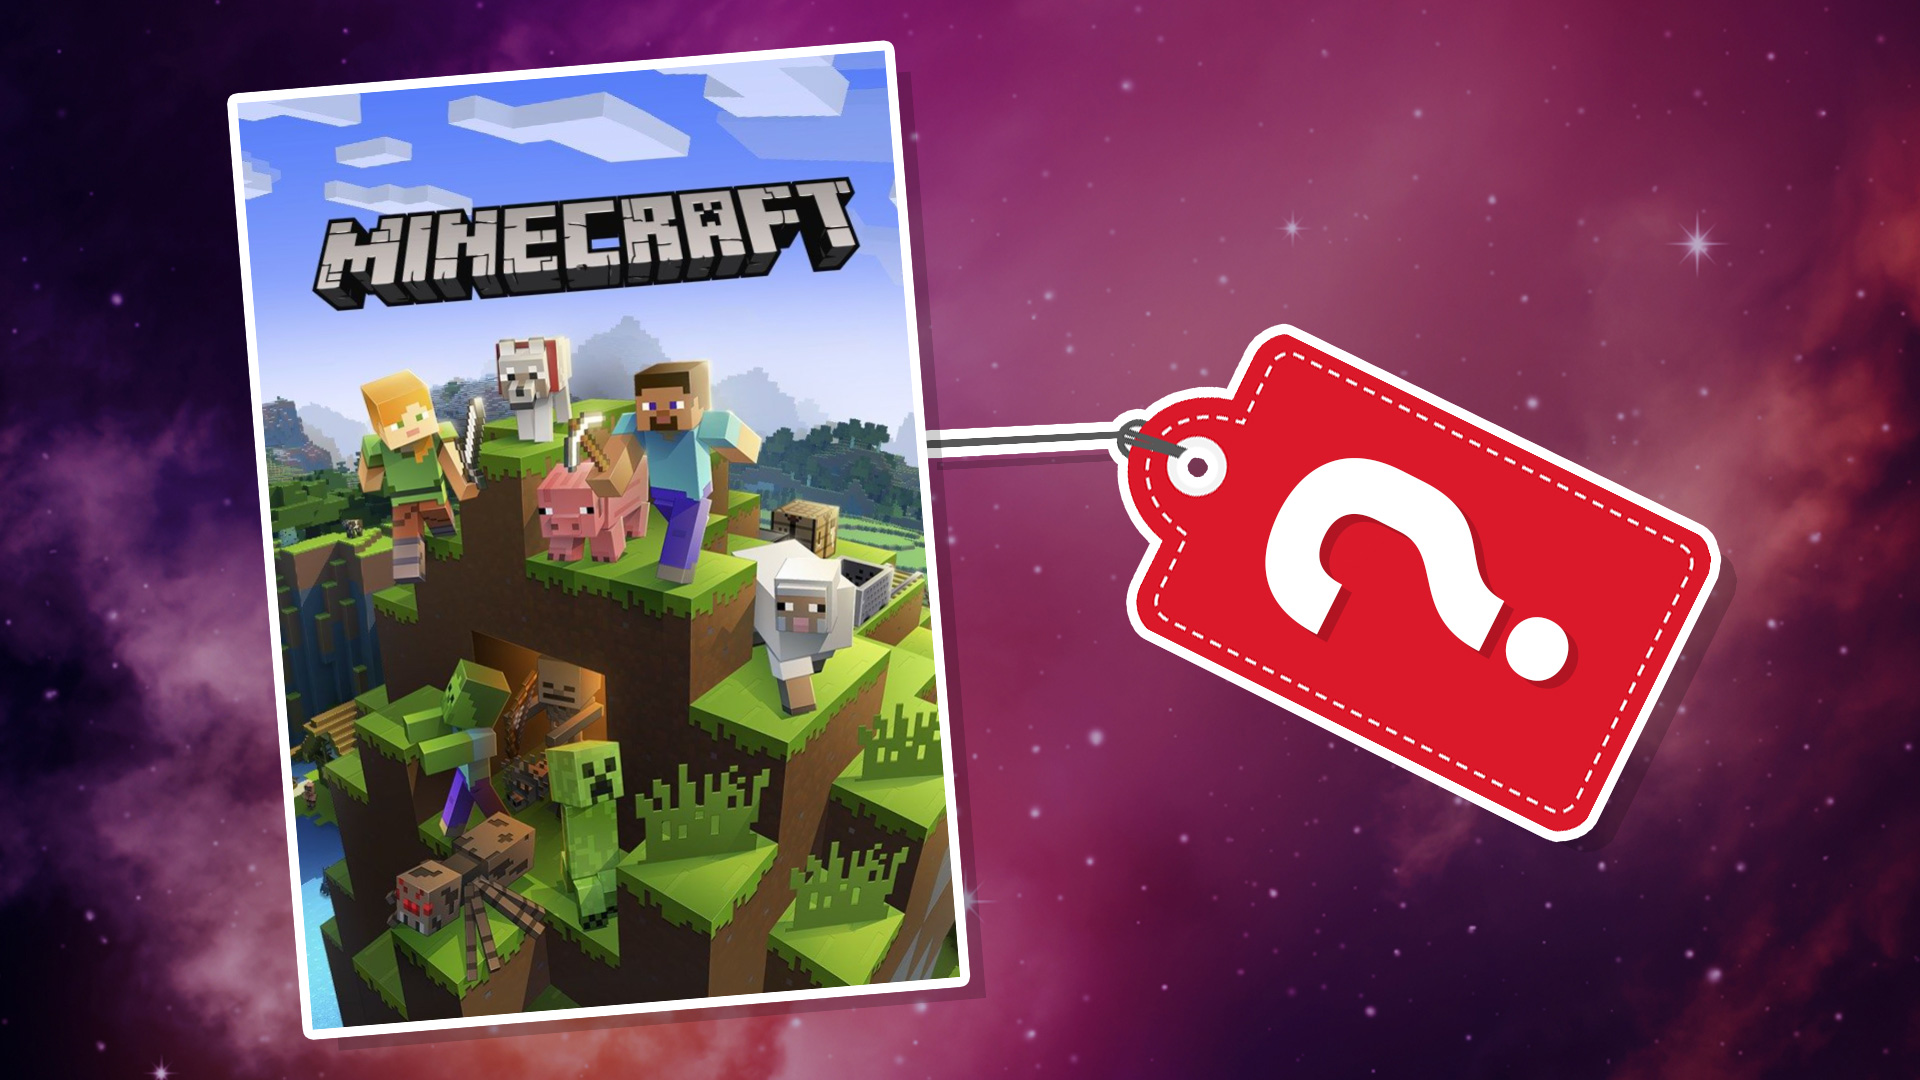 A Minecraft game and price tag